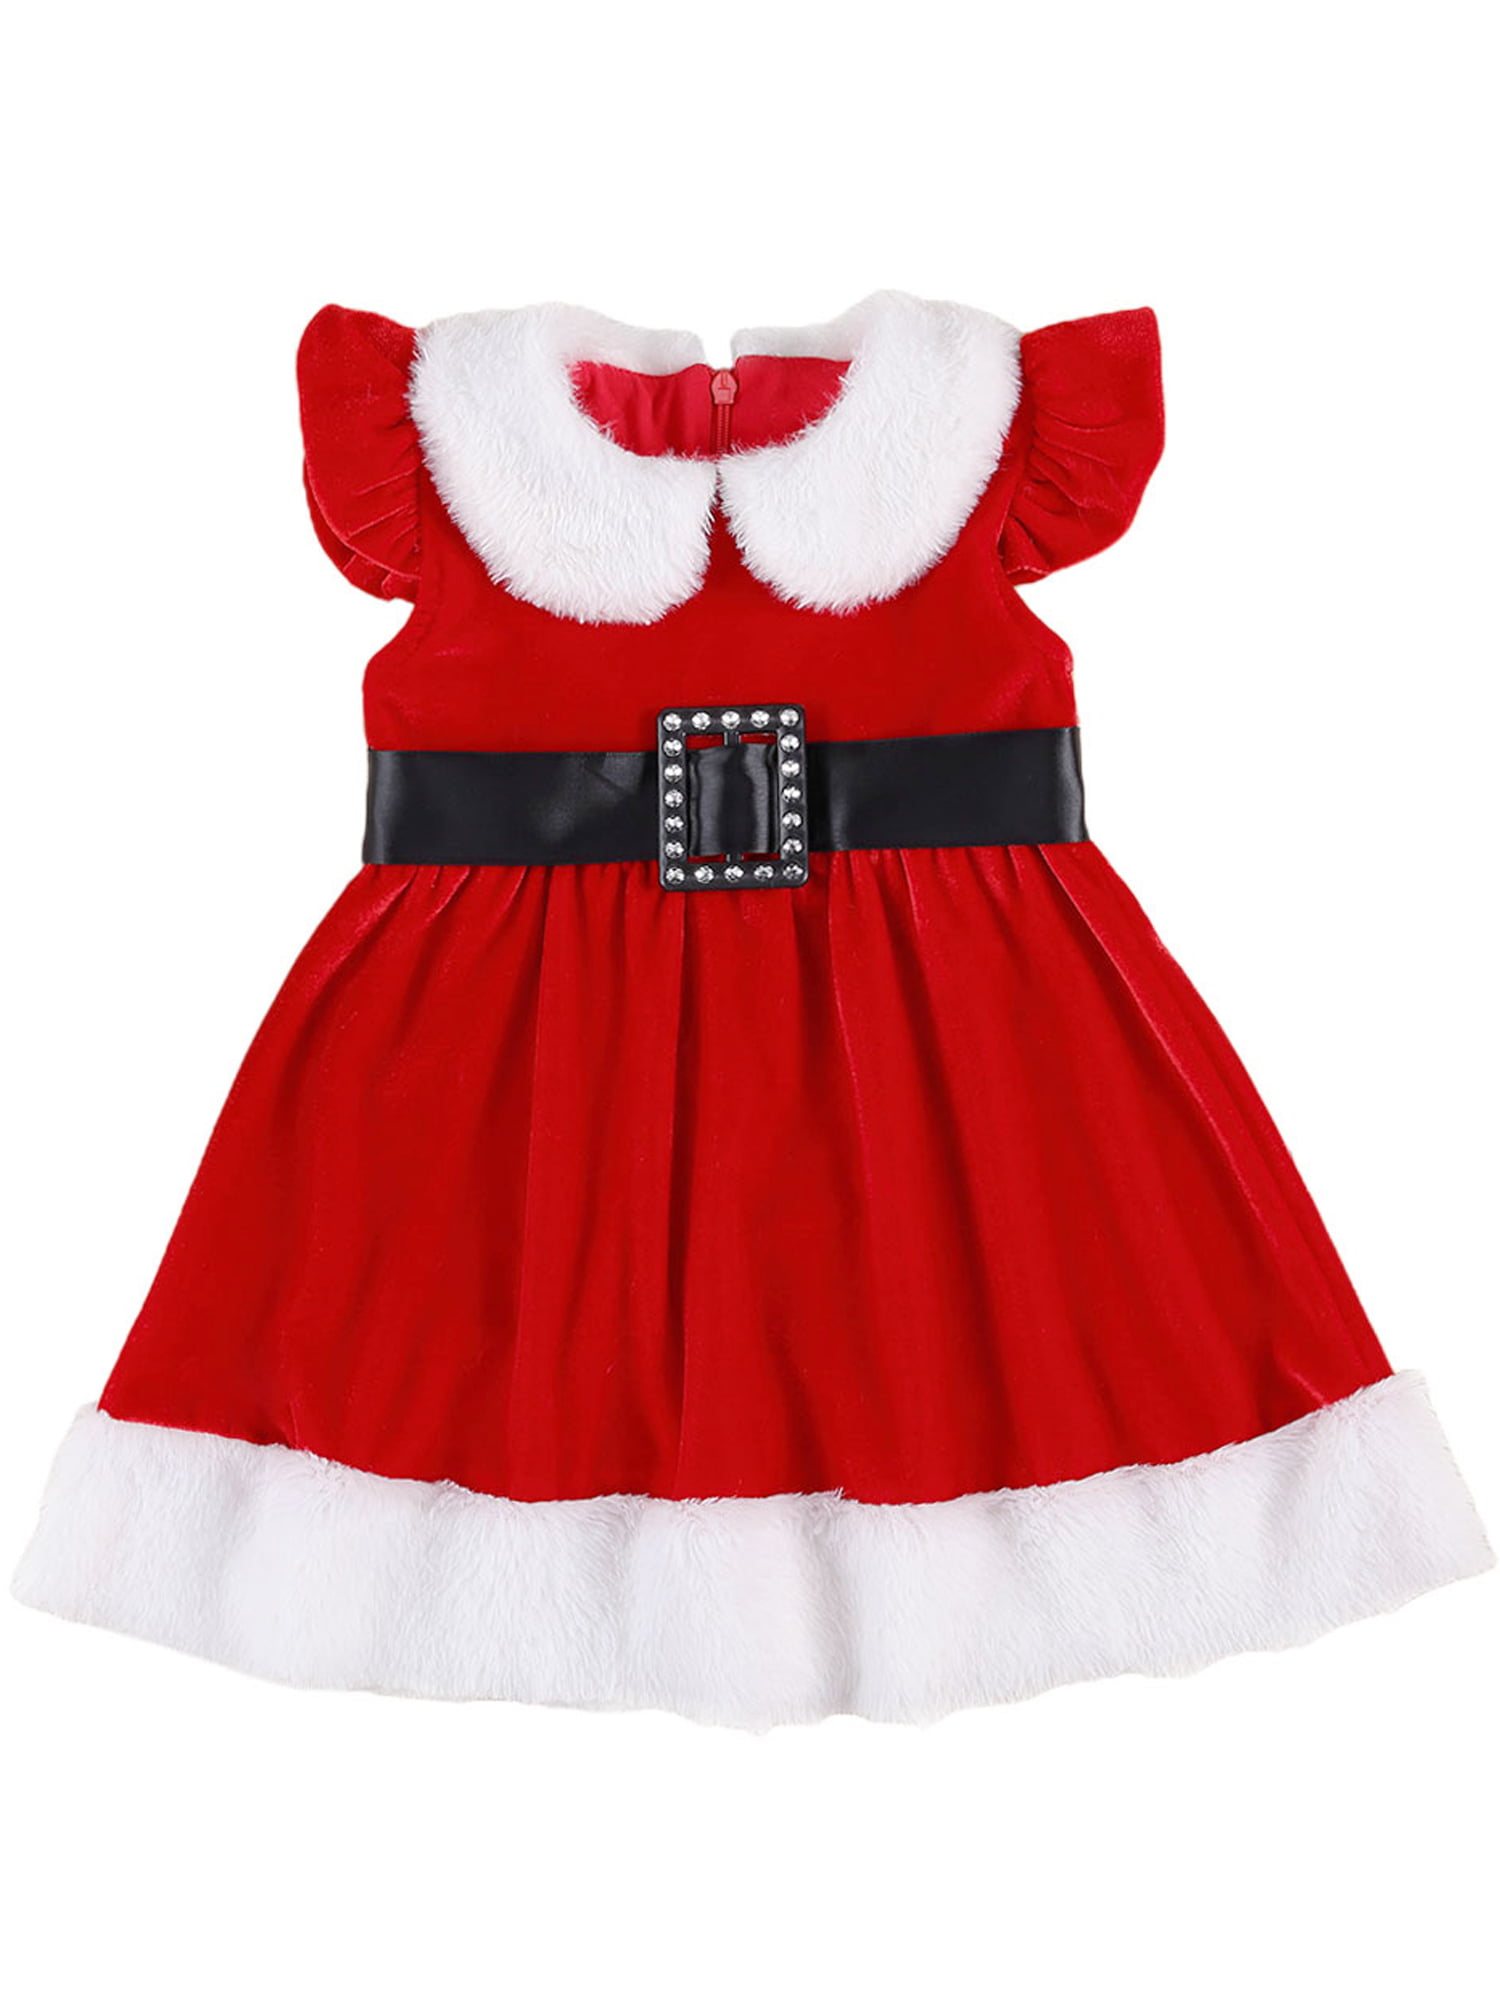 Toddler Kids Girls Christmas Costumes Santa Red Princess Dresses Outfits Clothes 